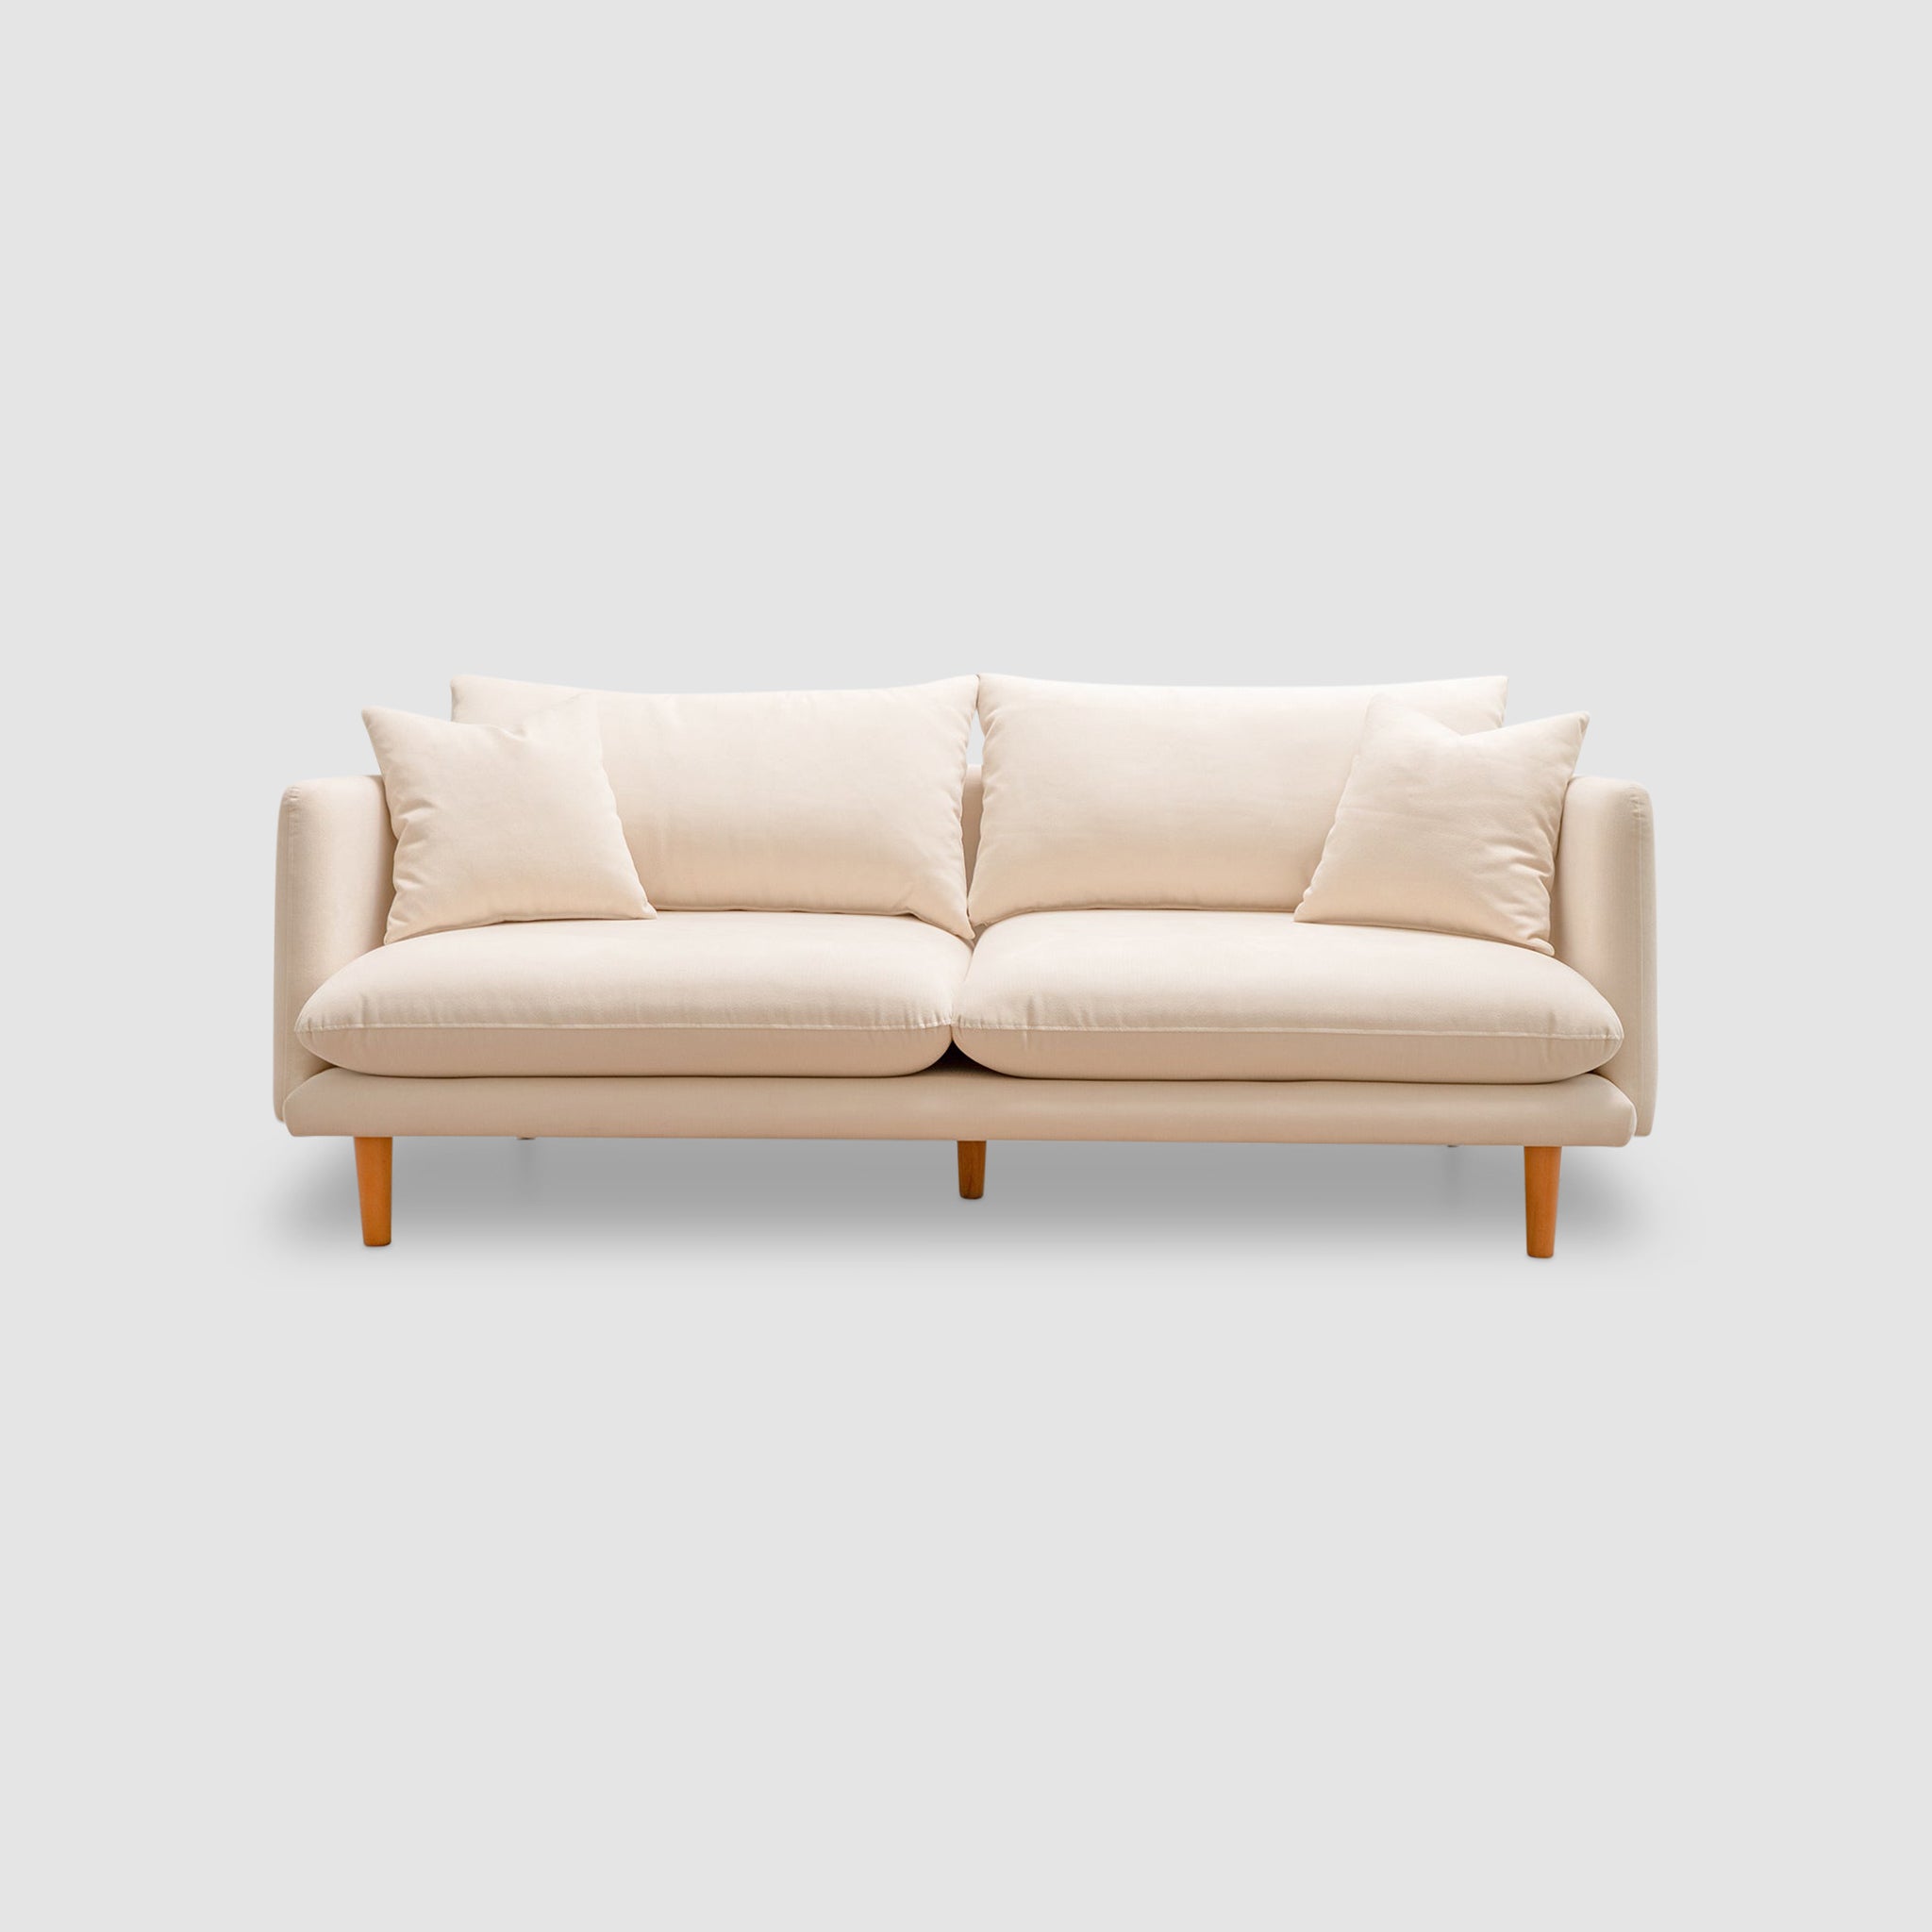 Contemporary beige sofa with wooden legs and plush cushions, offering a comfortable and stylish seating option for modern living rooms.